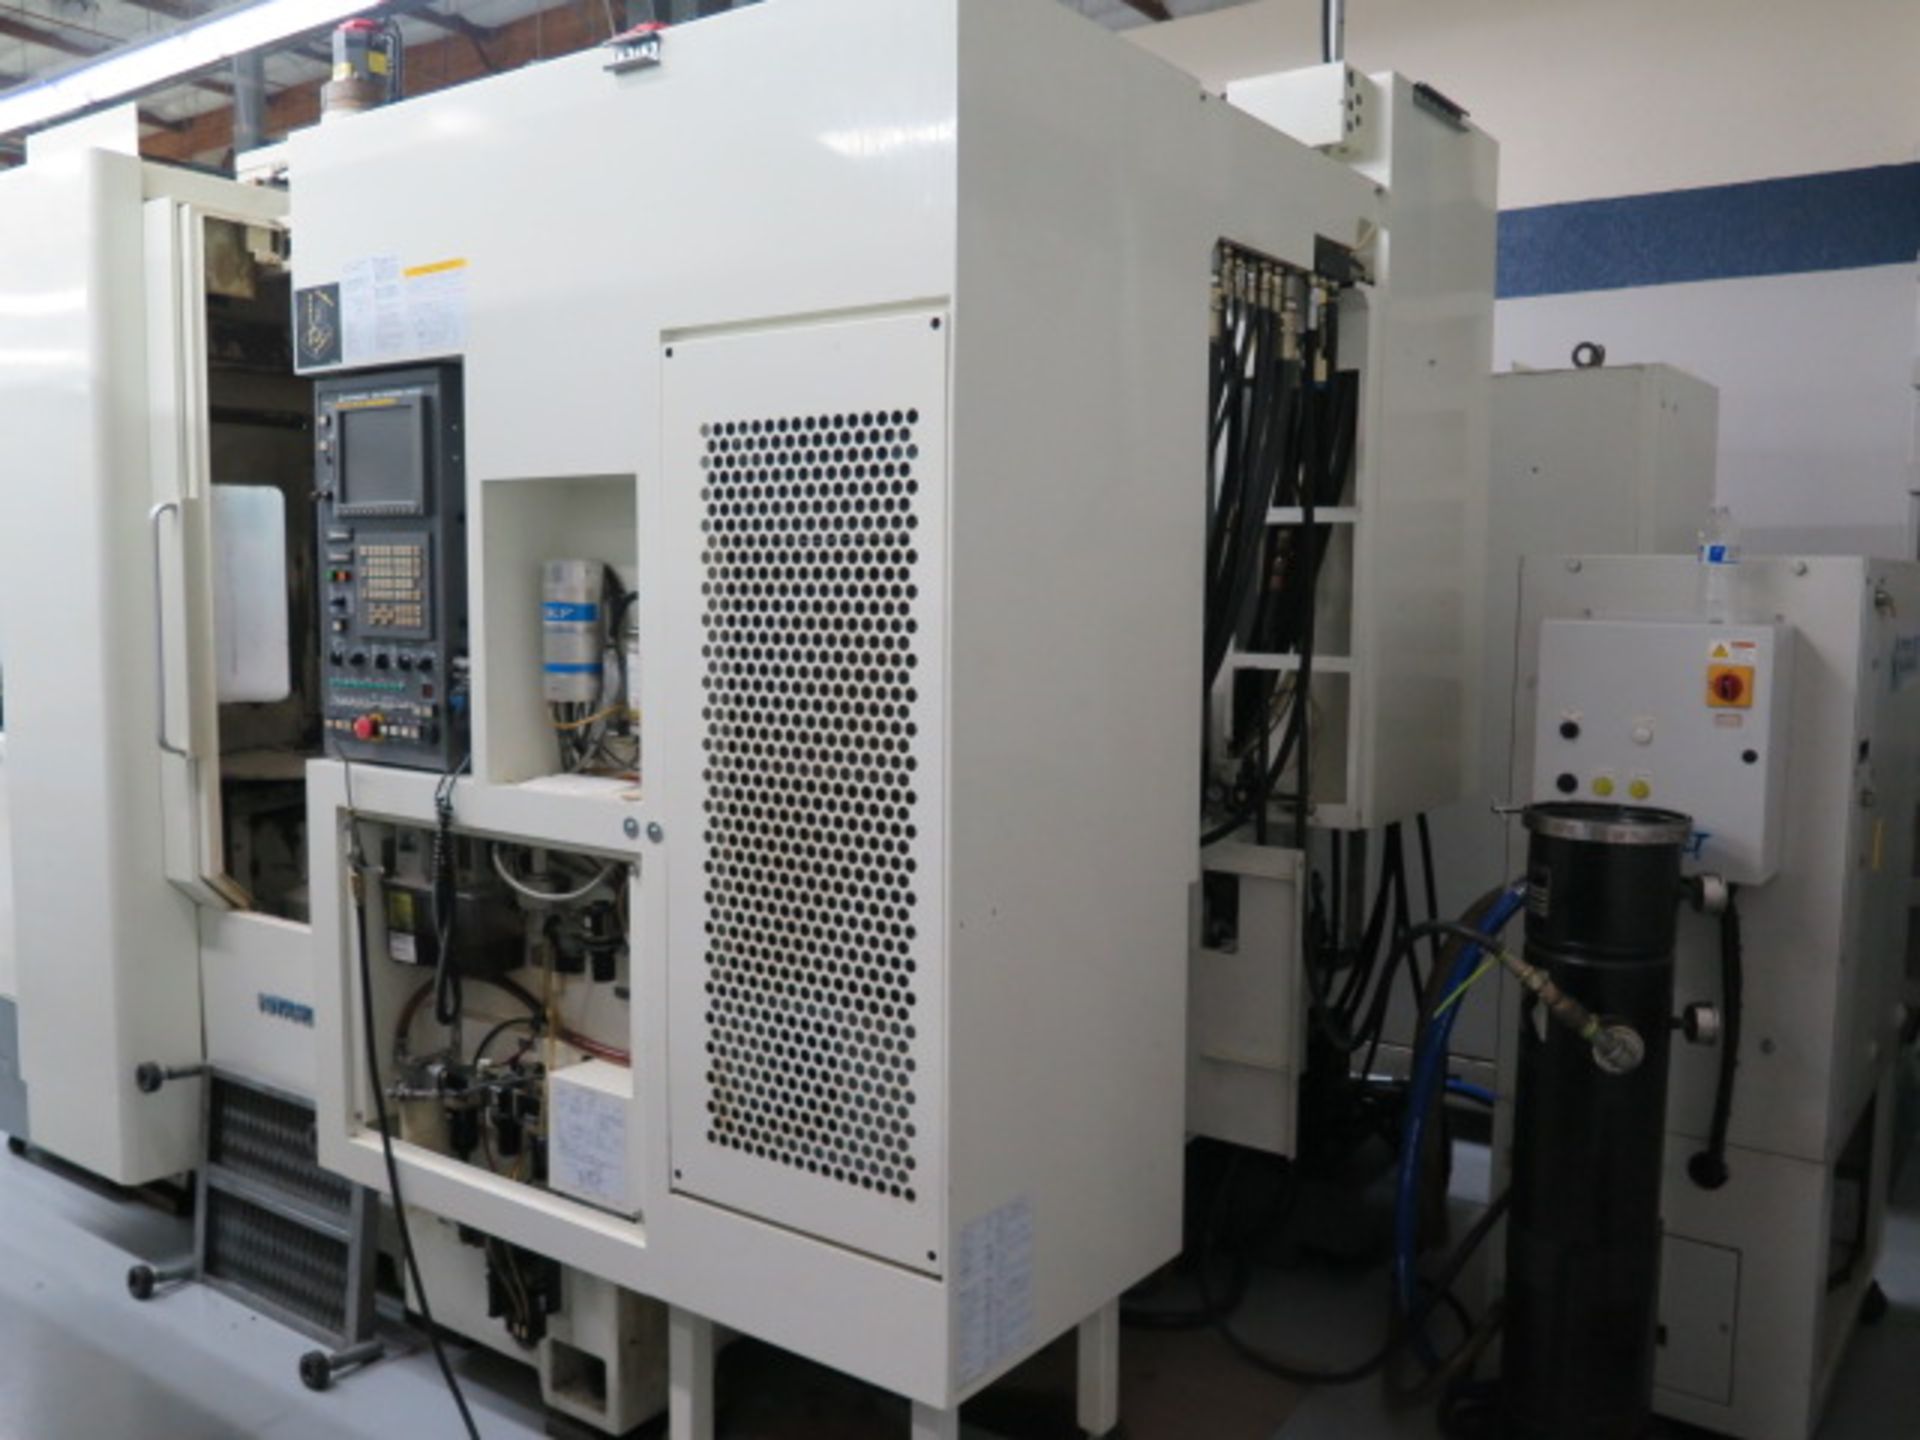 Kitamura Mycenter HX300iF 2-Paller 4-Axis CNC Horizontal Machining Center s/n 40975 SOLD AS IS - Image 3 of 26